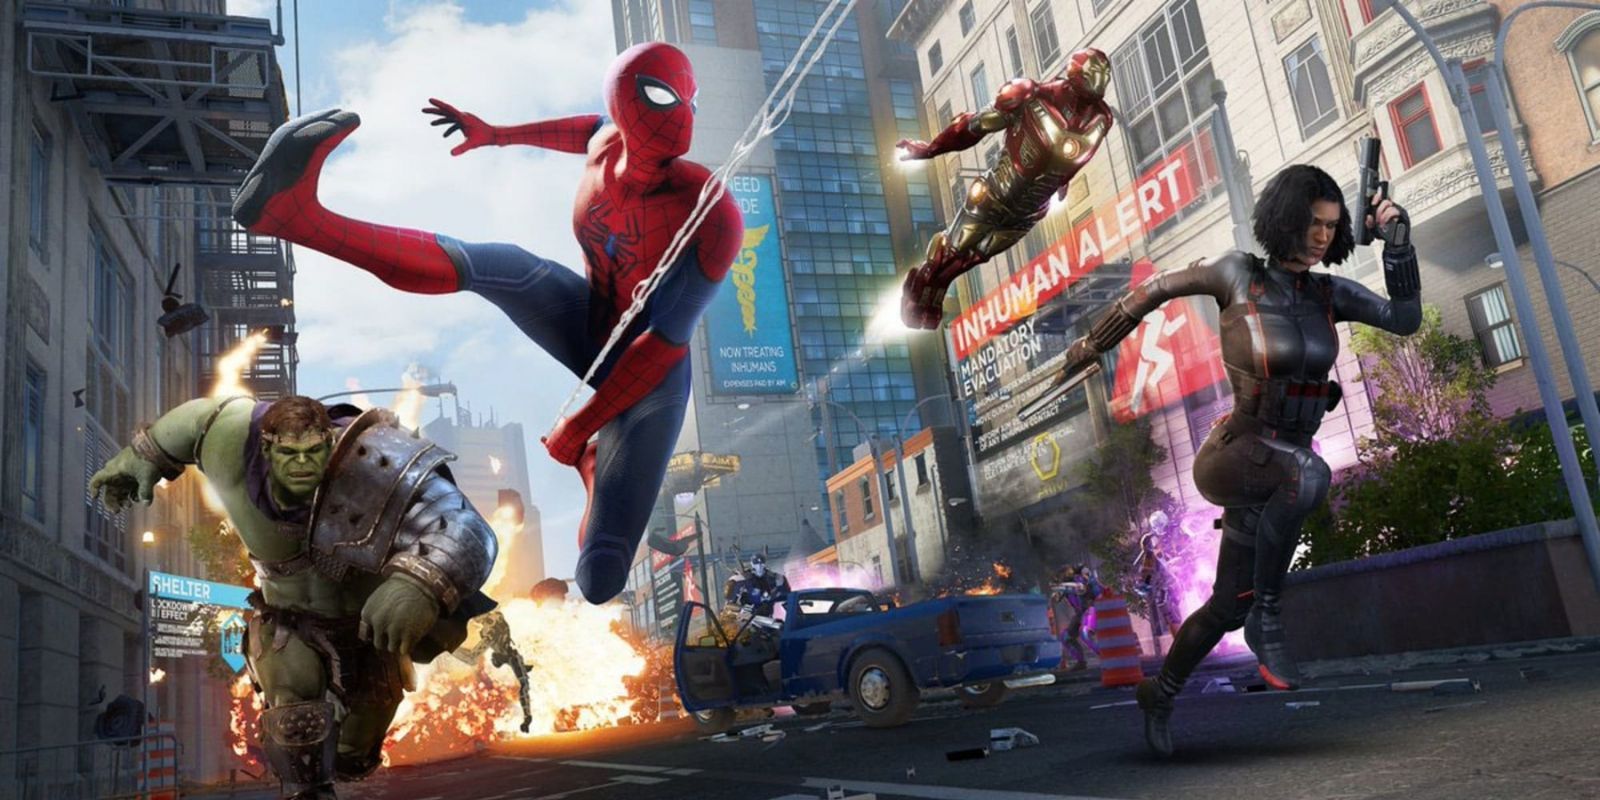 The Avengers charge into action alongside Spider-Man